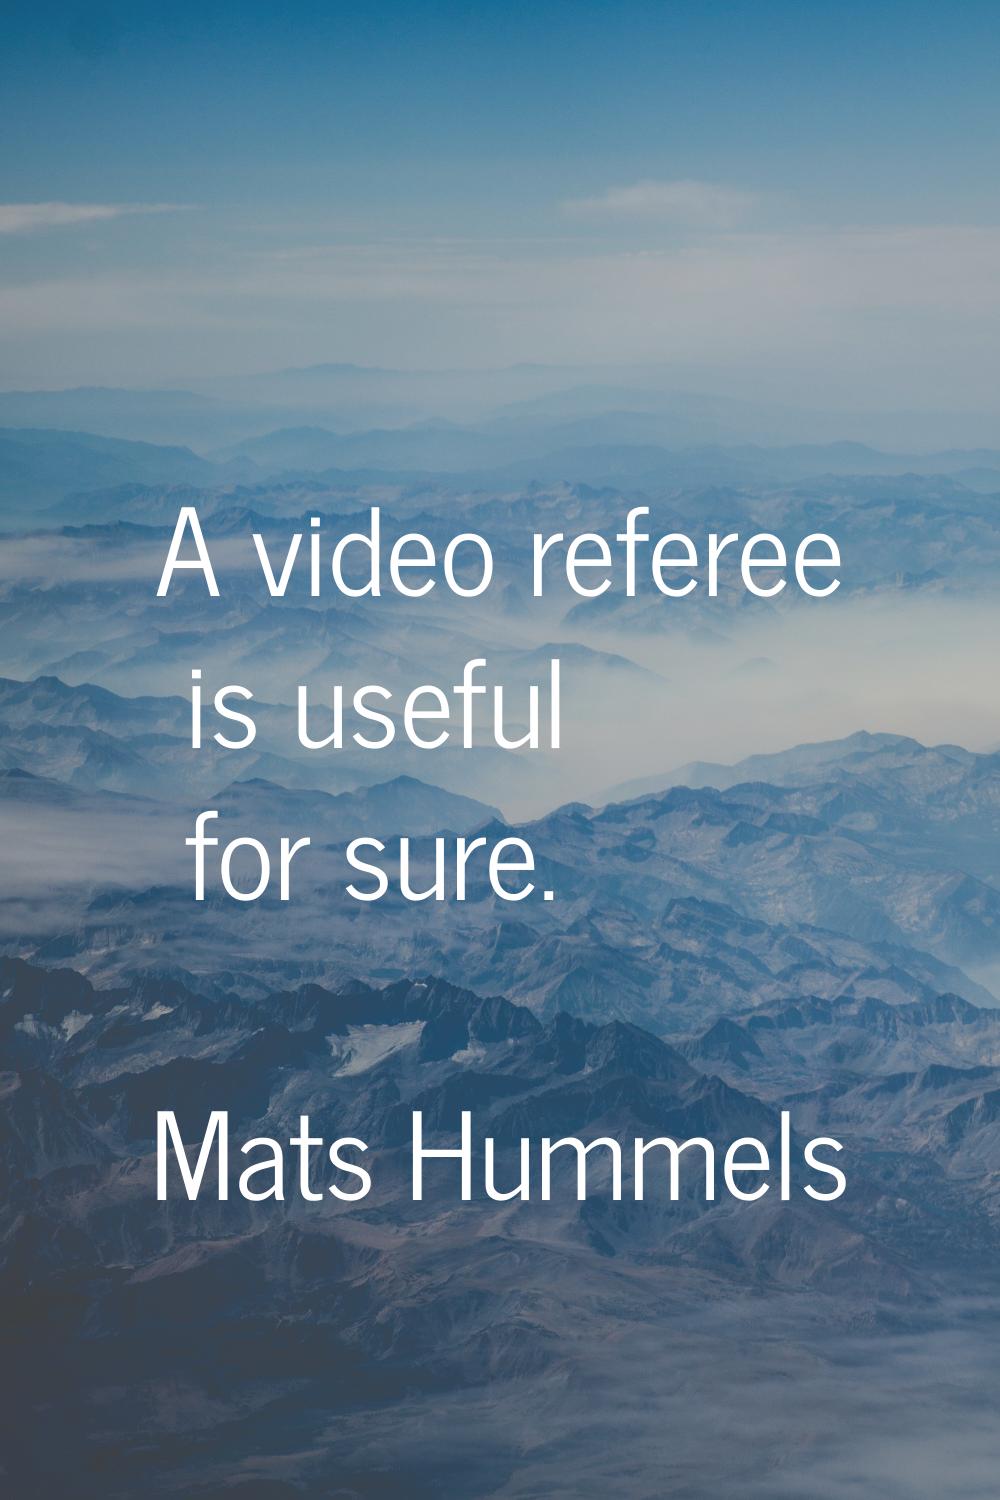 A video referee is useful for sure.